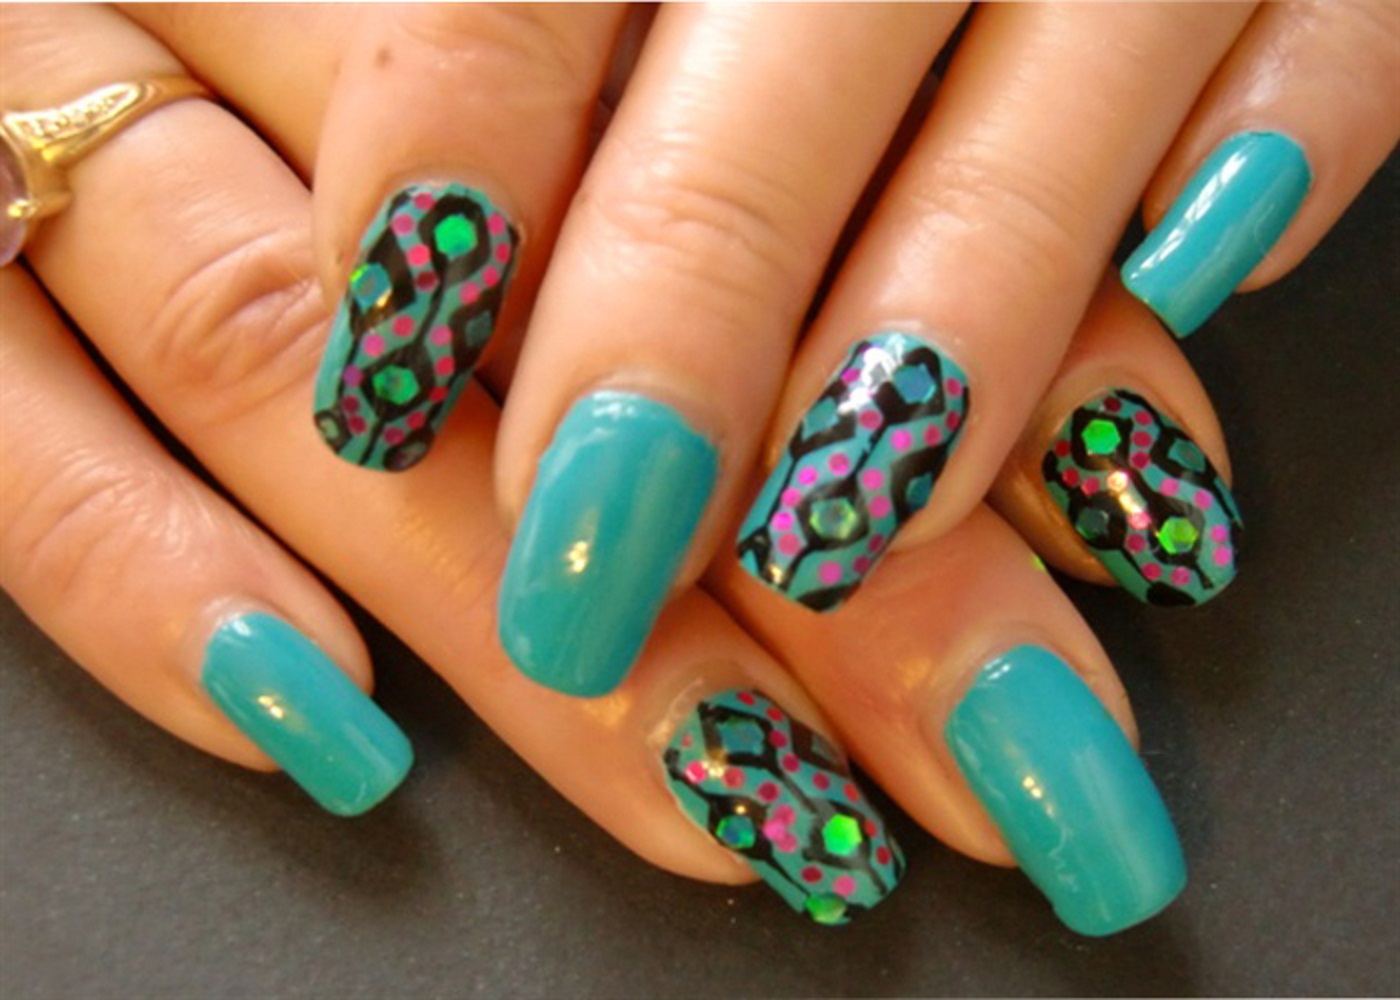 10. Creative Ways to Incorporate Pearls into Your Nail Art Design - wide 8